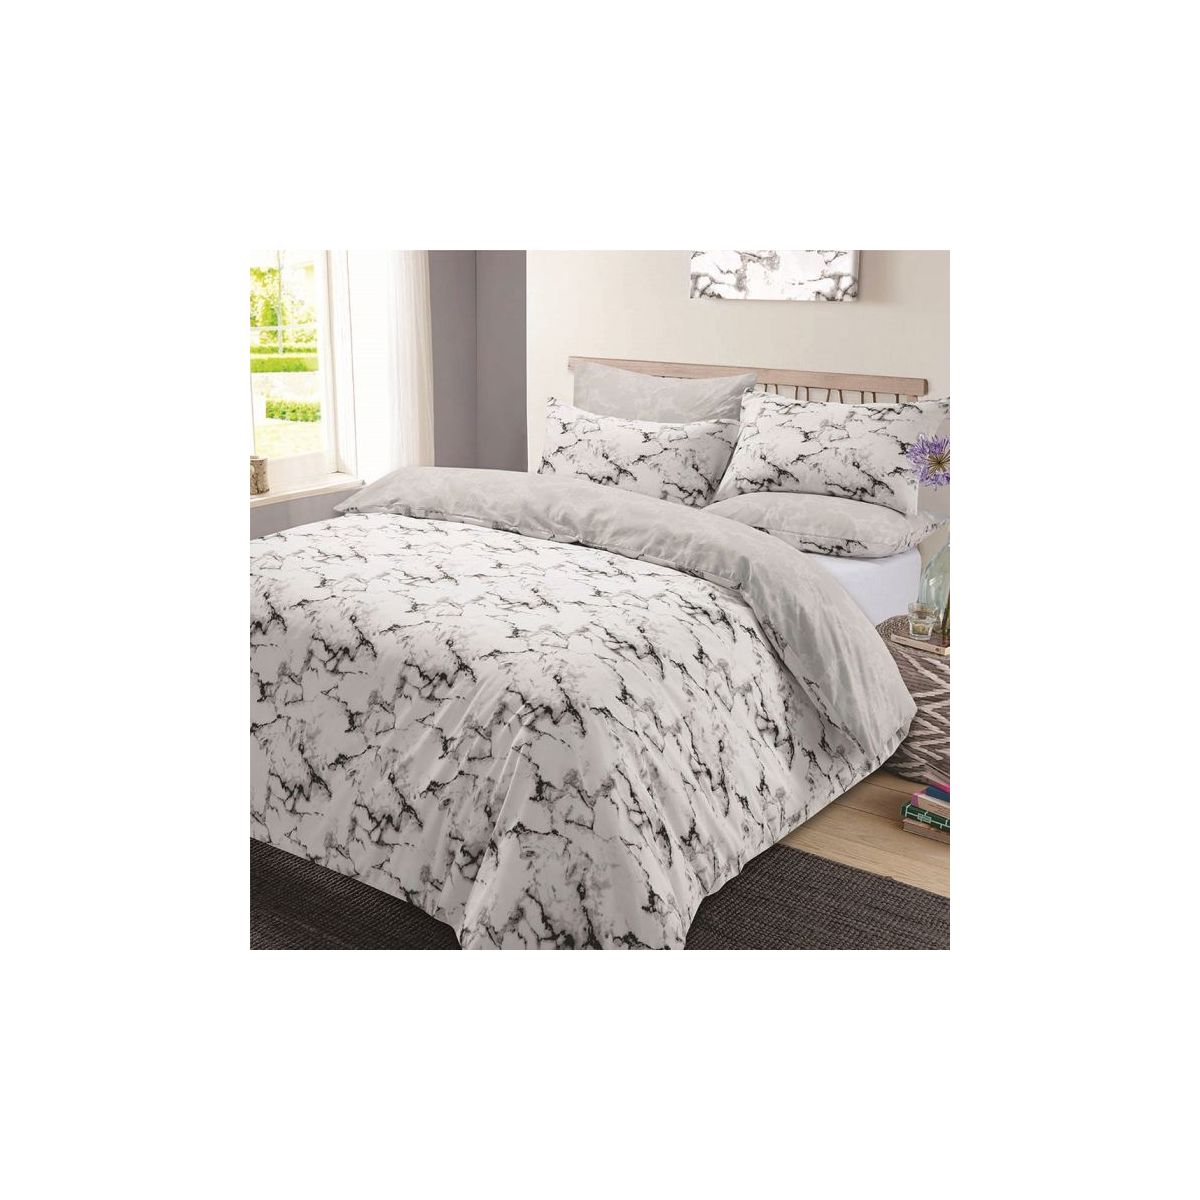 Marble Edge Duvet Cover with Pillow Case Reversible Bedding Set - Grey, Single